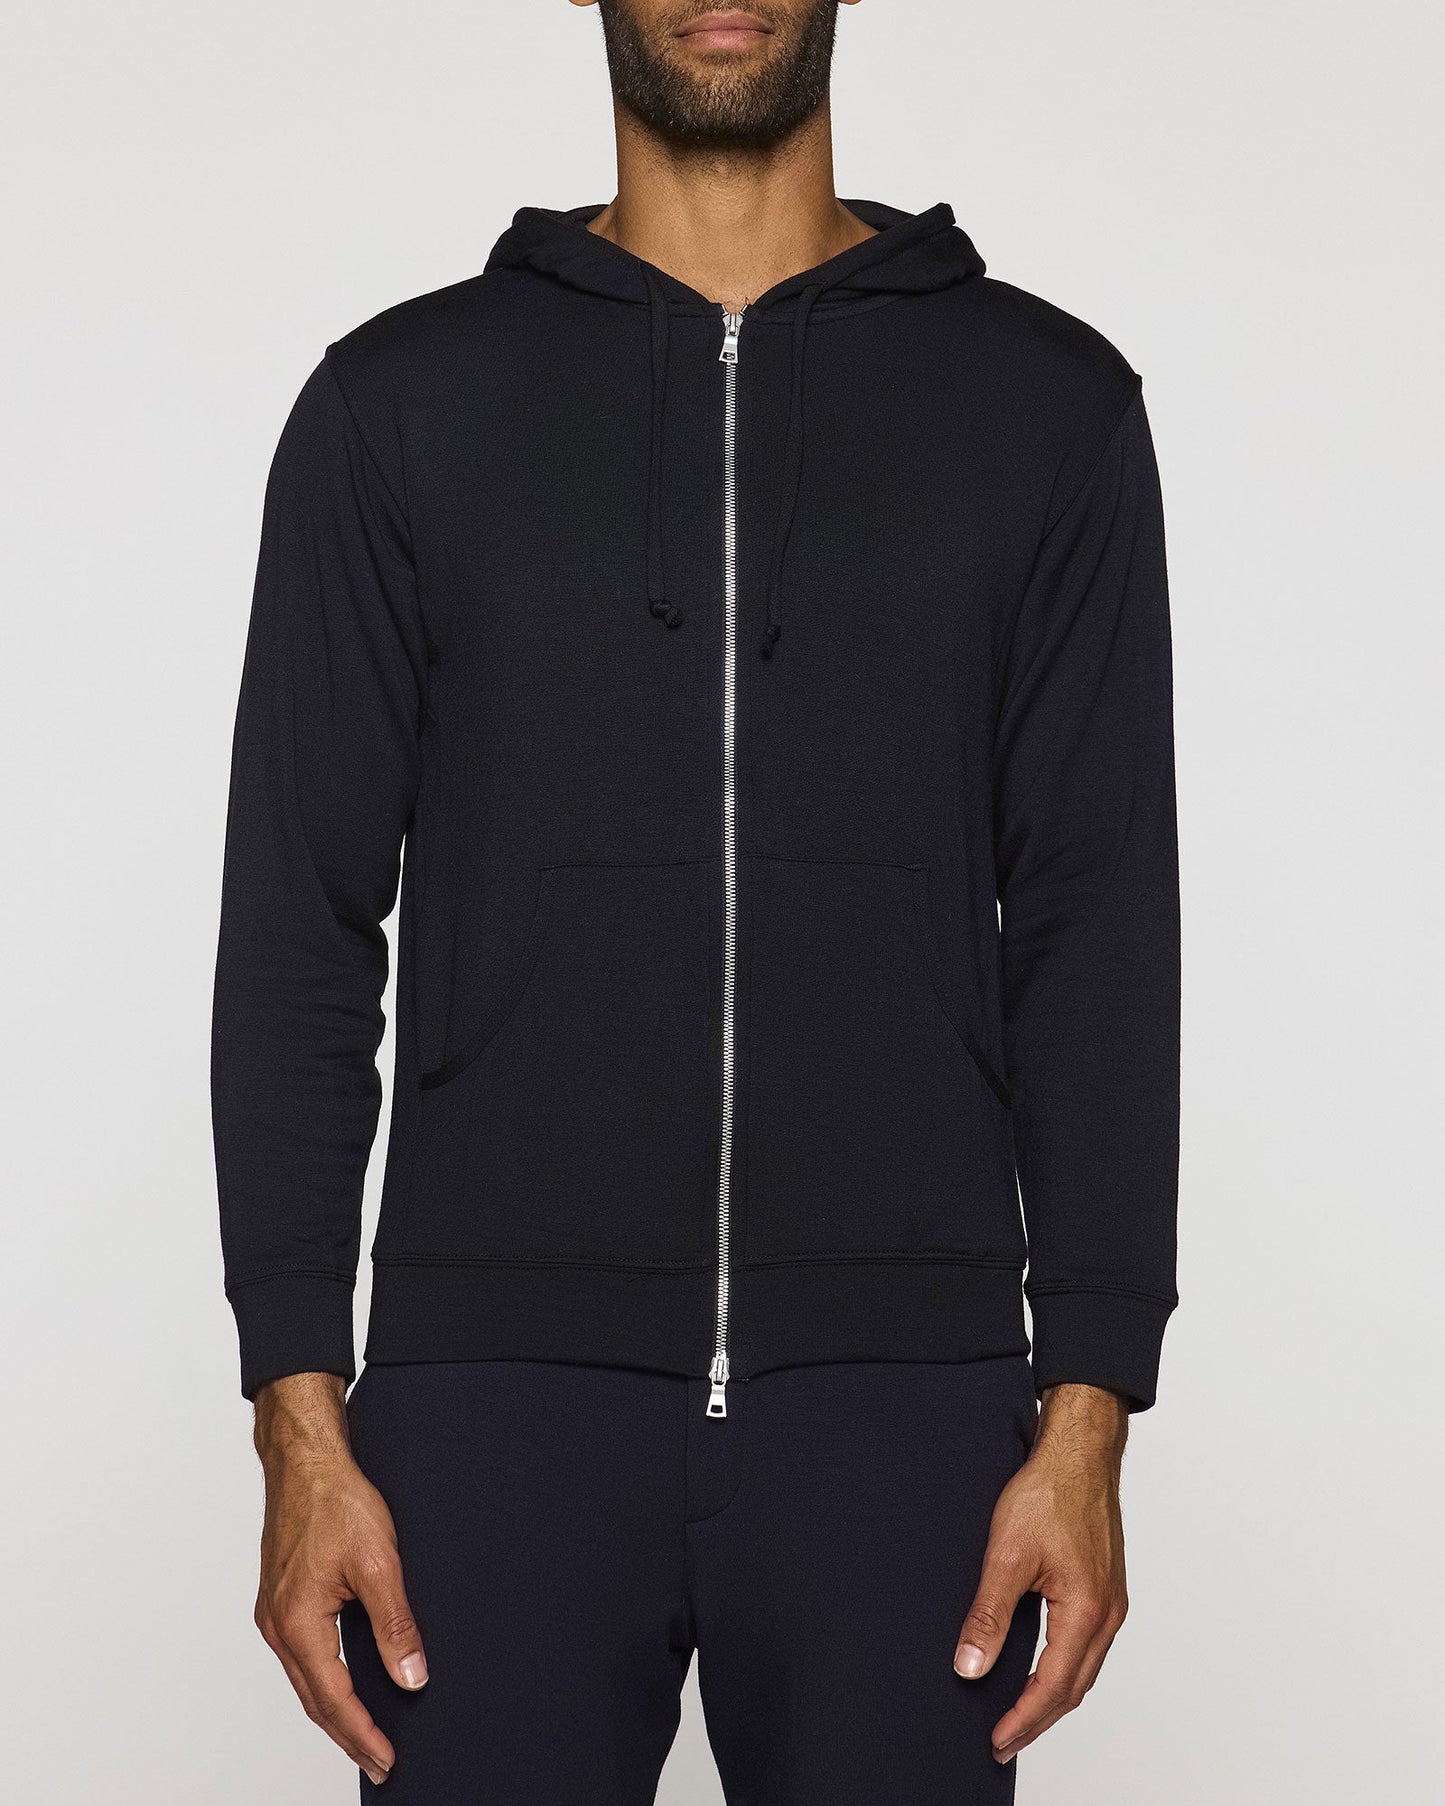  Active Basic Women's Athletic Fitted Zip up Sweat